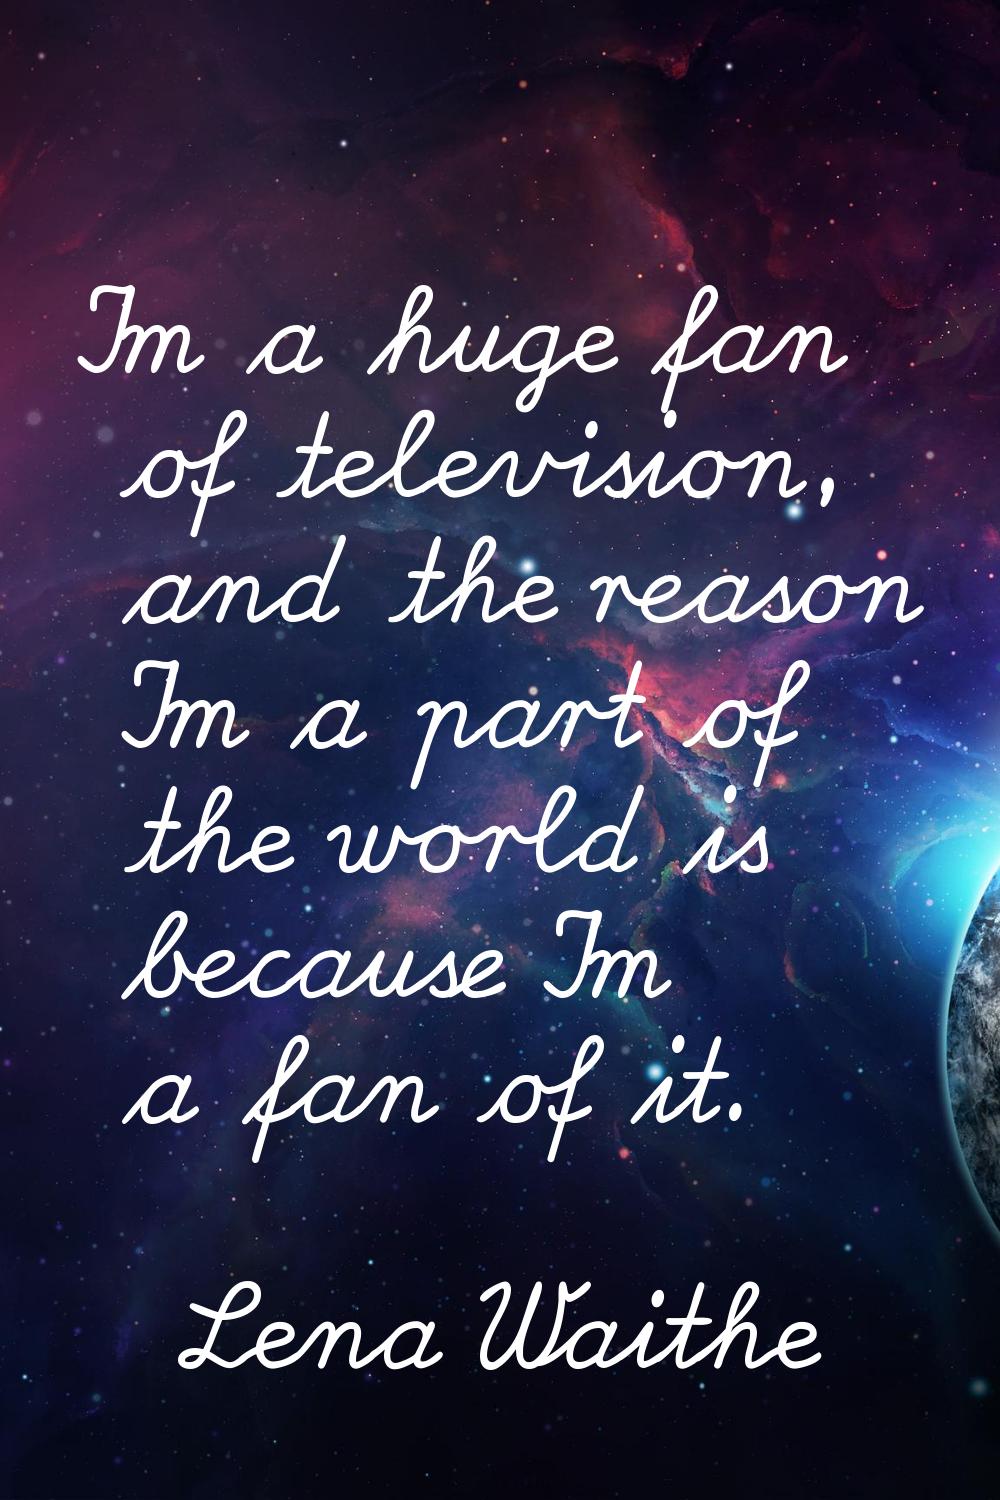 I'm a huge fan of television, and the reason I'm a part of the world is because I'm a fan of it.